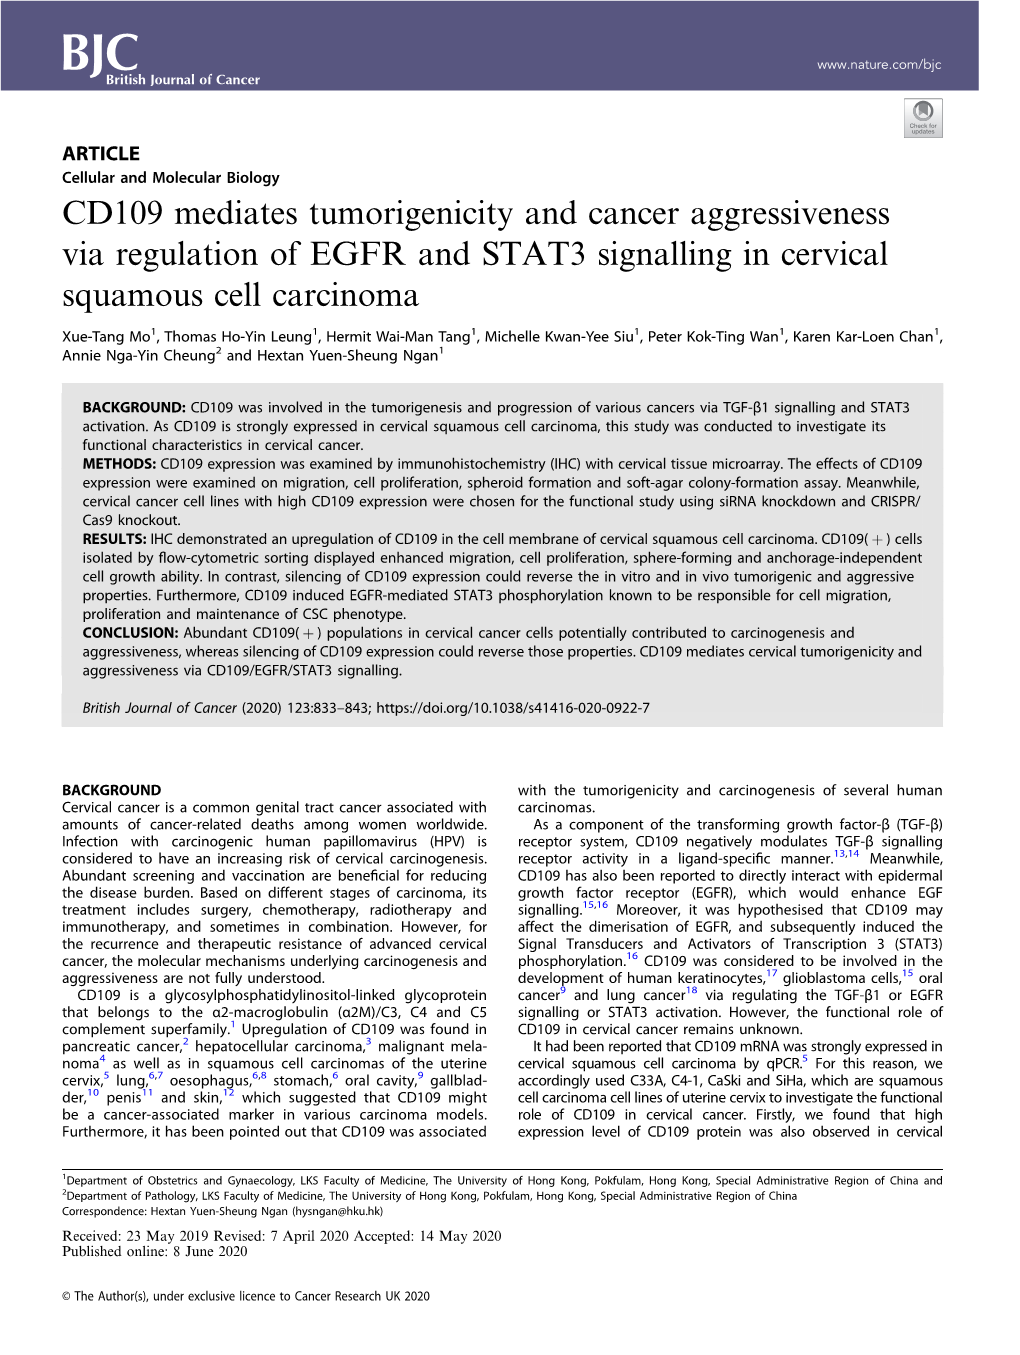 CD109 Mediates Tumorigenicity and Cancer Aggressiveness Via Regulation of EGFR and STAT3 Signalling in Cervical Squamous Cell Carcinoma